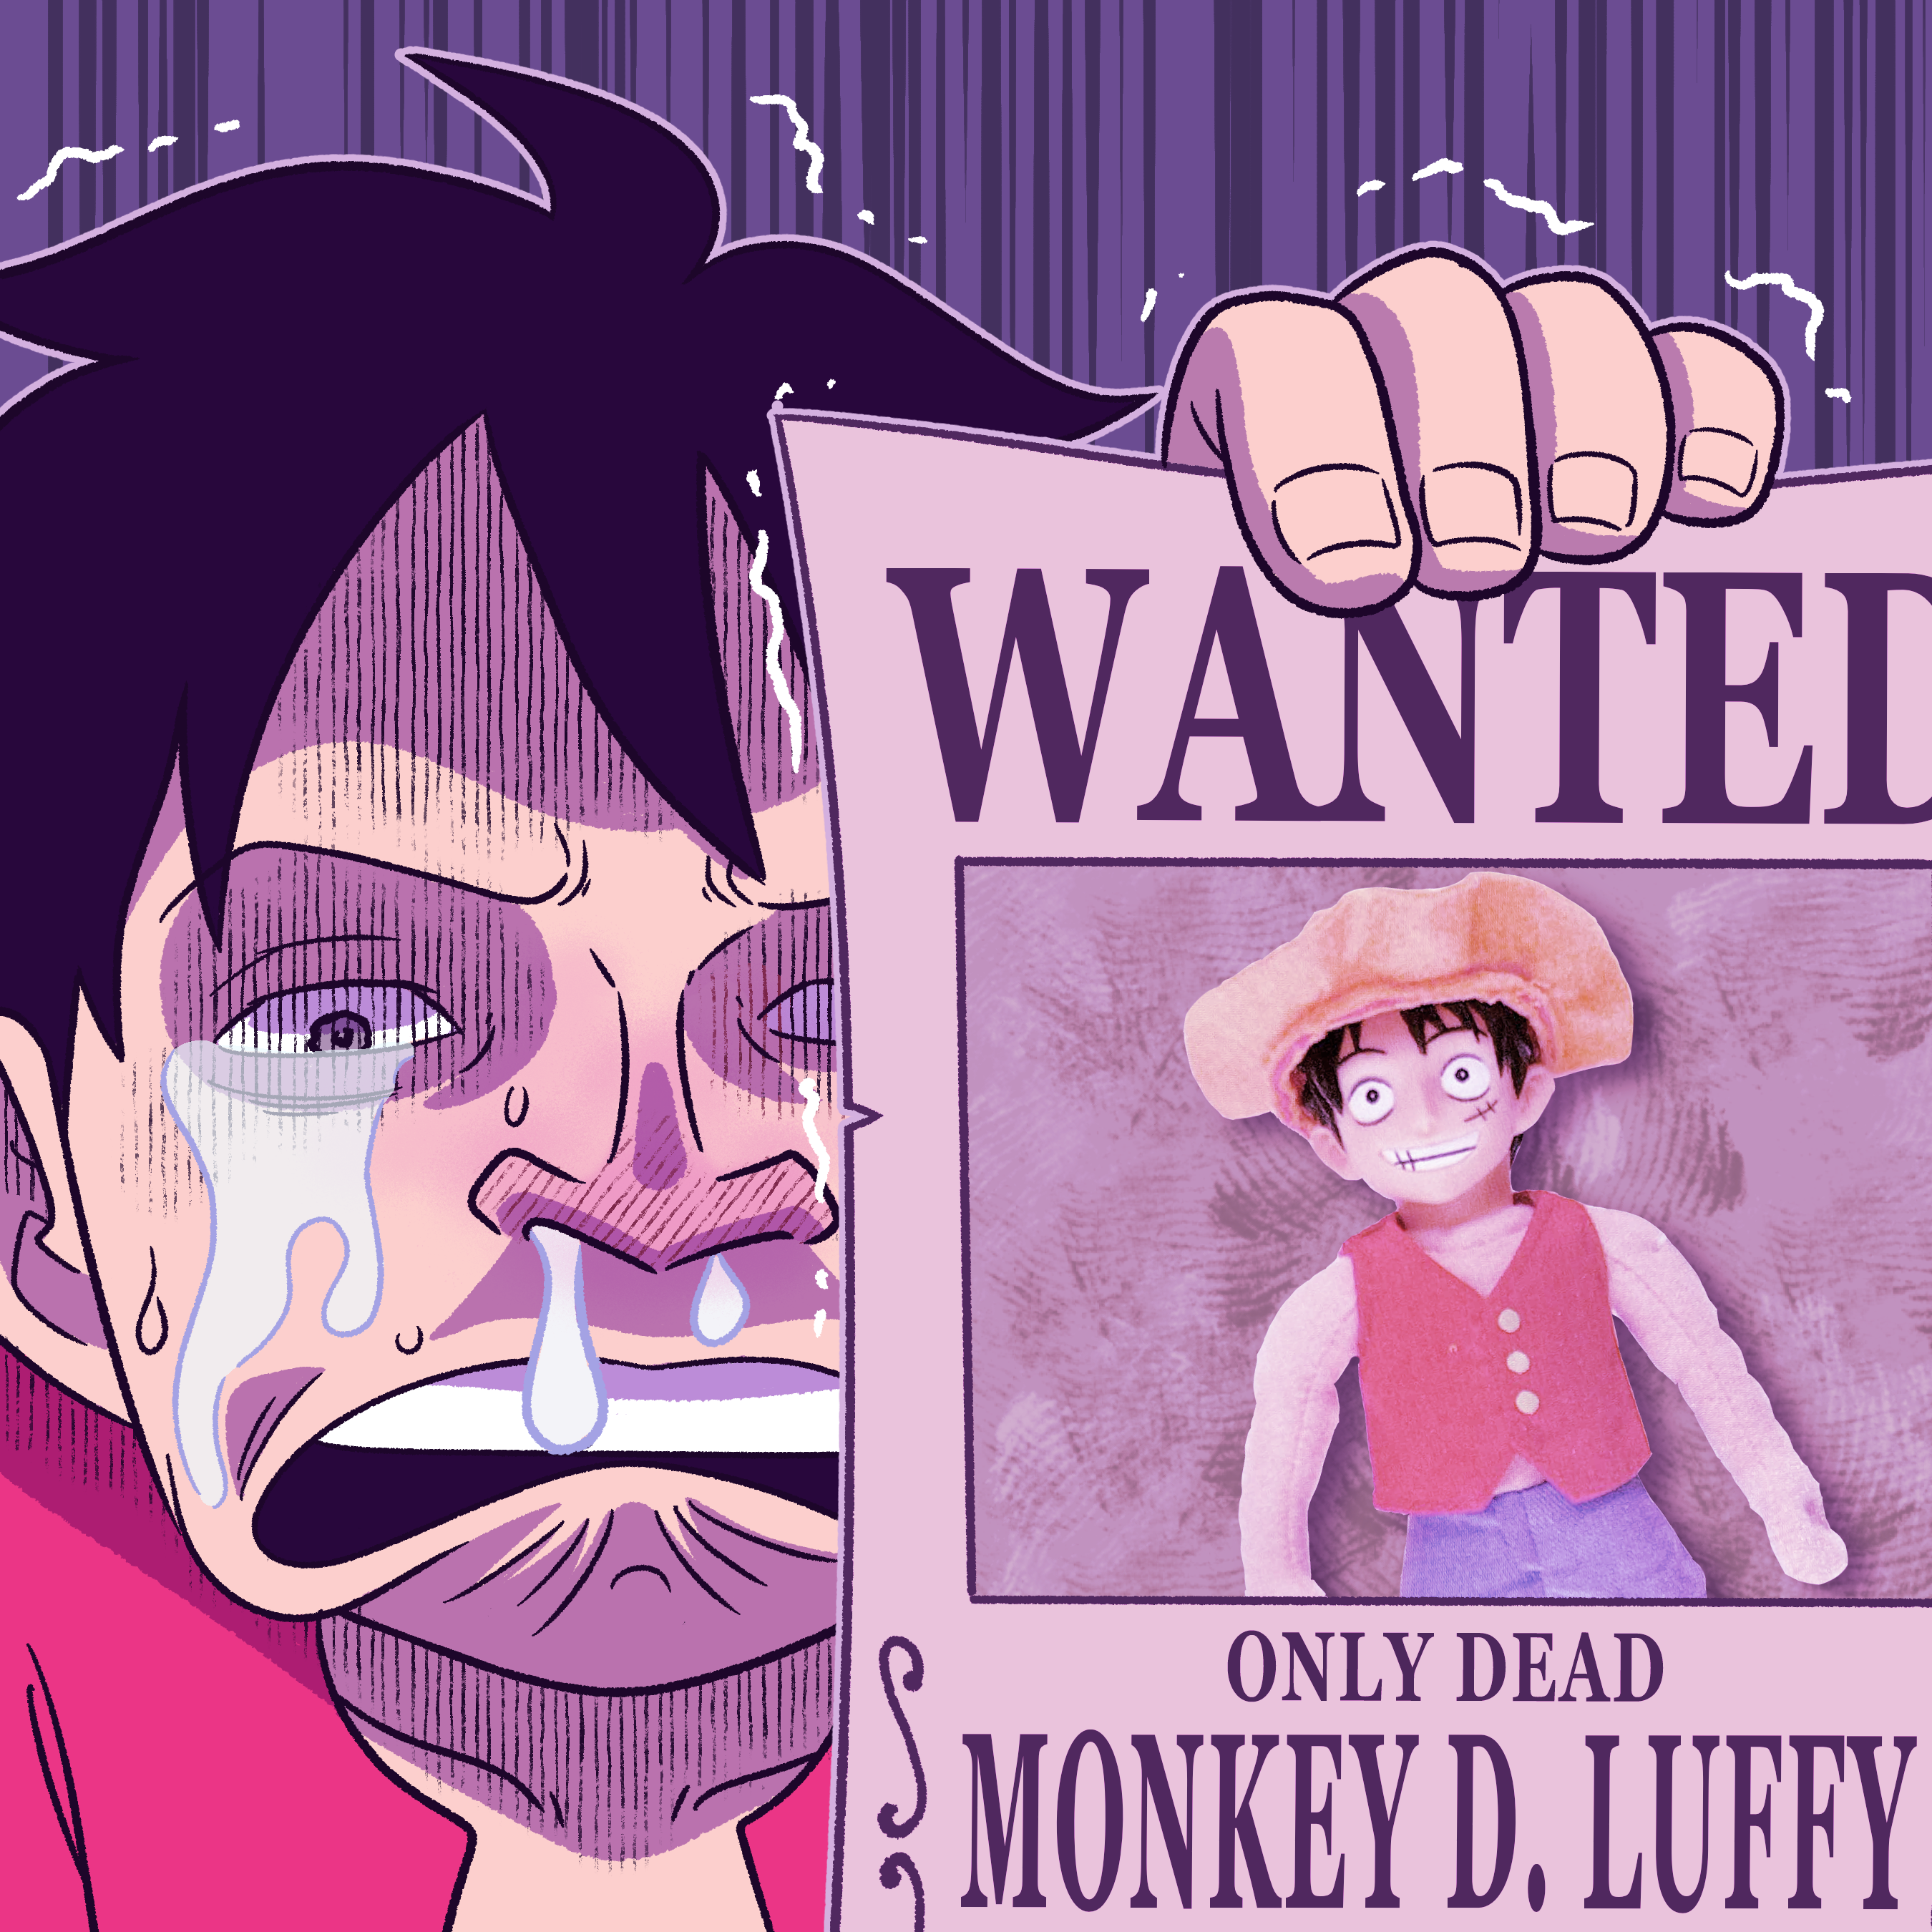 Episode 1054 - One Piece - Anime News Network